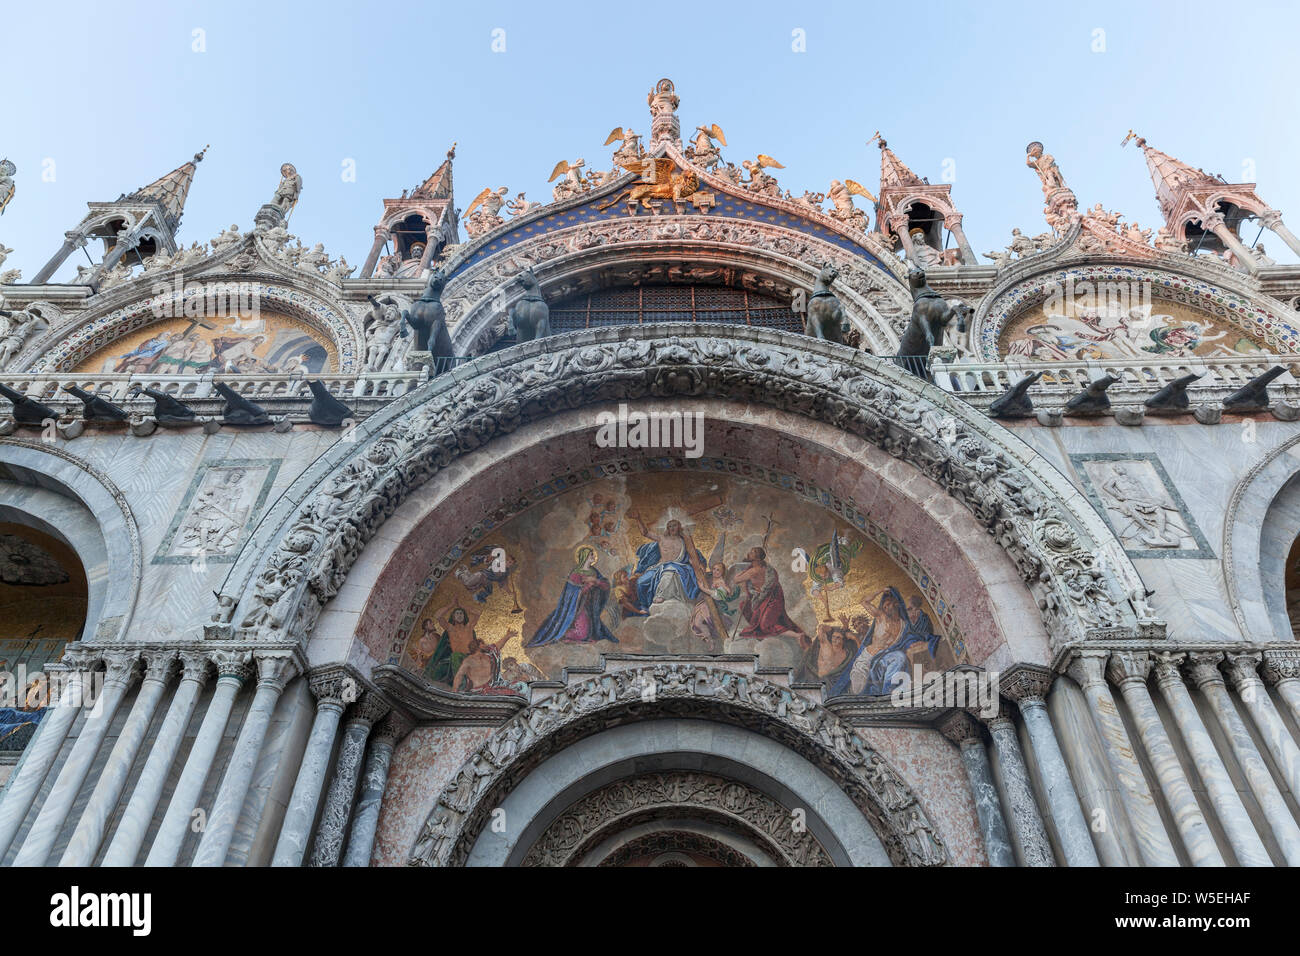 The beautiful Saint Mark's Basilica in Venice Italy.The basilica is on the Piazza San Marco in the historic city that is a popular tourist destination. Stock Photo